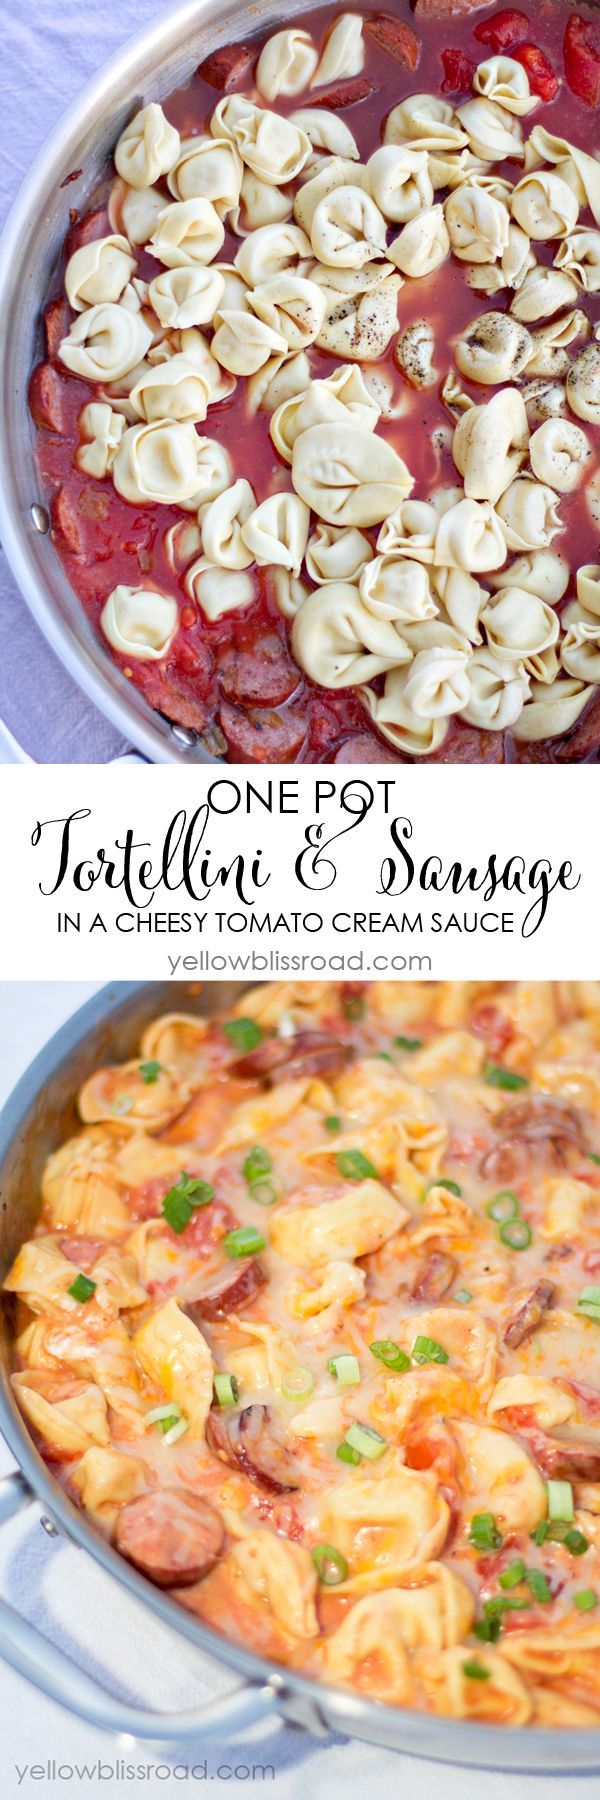 One Pot Tortellini and (Turkey) Sausage in a Cheesy Tomato Cream Sauce – A delicious meal thats ready in 20 minutes!